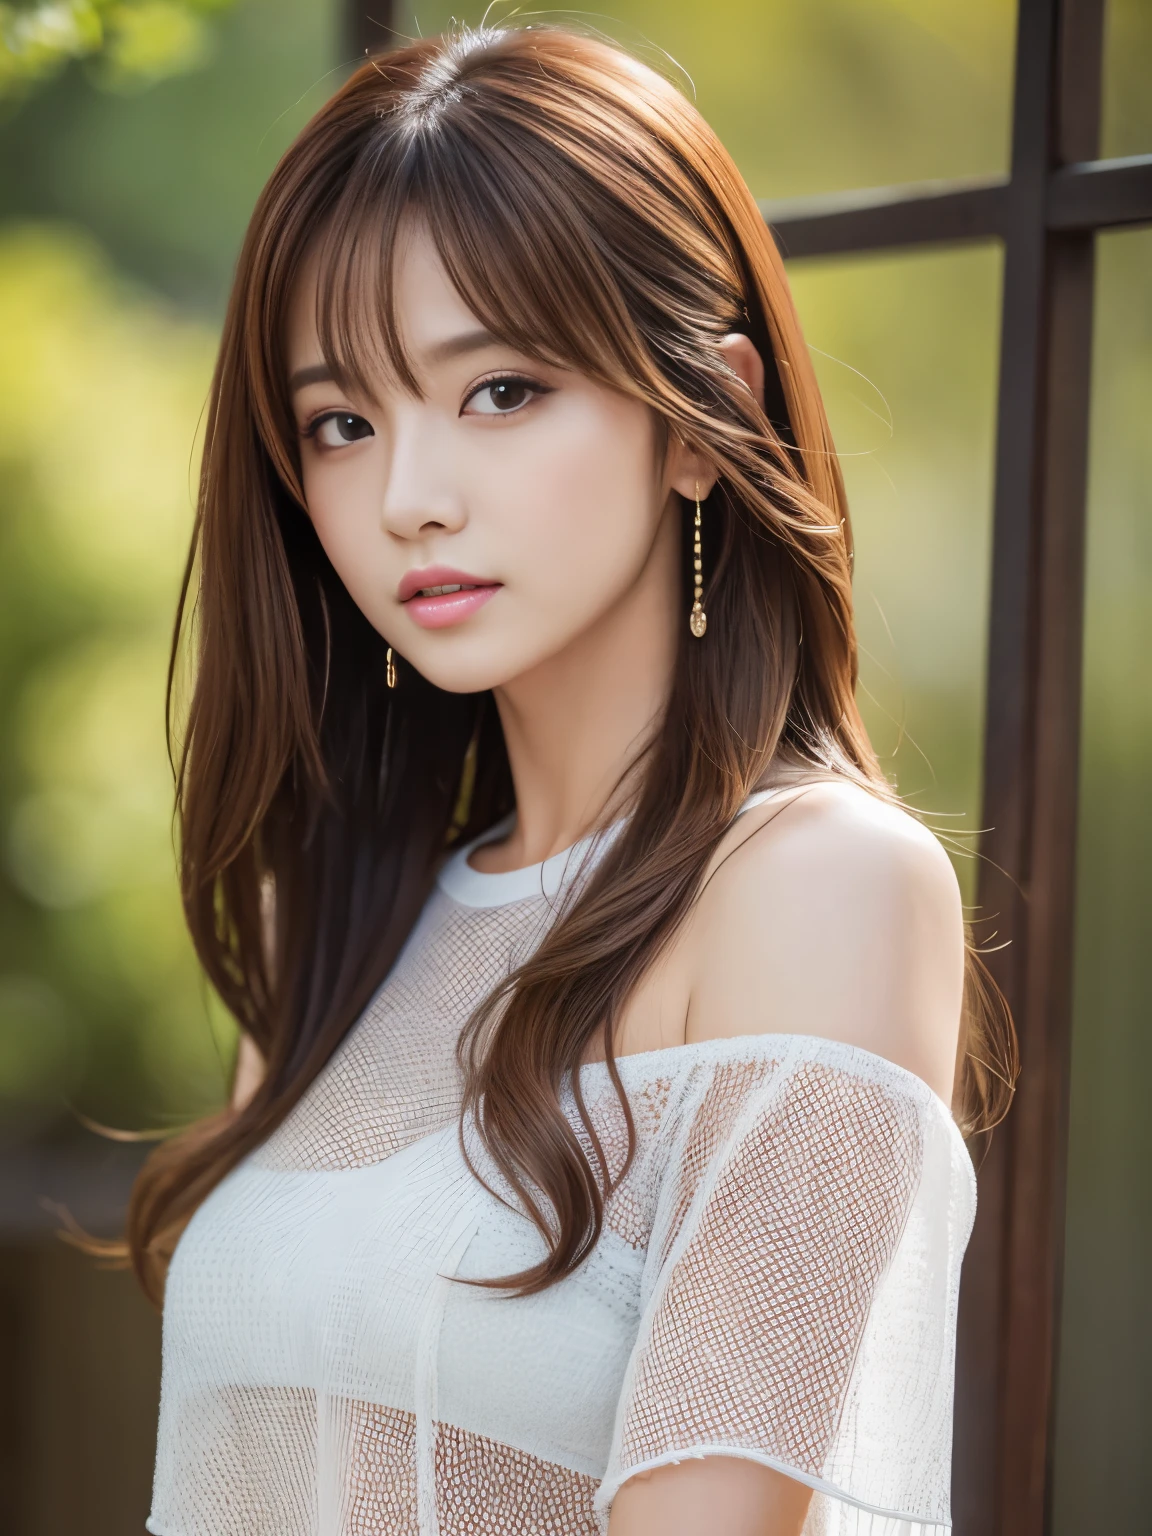 Ultra High Definition, Superior Quality, Premier Quality, ultra detailed, Photorealistic, 8k, RAW Photos, highest quality, masterpiece,  Attractive Woman, Stunning Lady, Brown Hair, Shoulder Length Layered, Mesh Hair, Japanese Idol, Sophisticated, Stylish, 